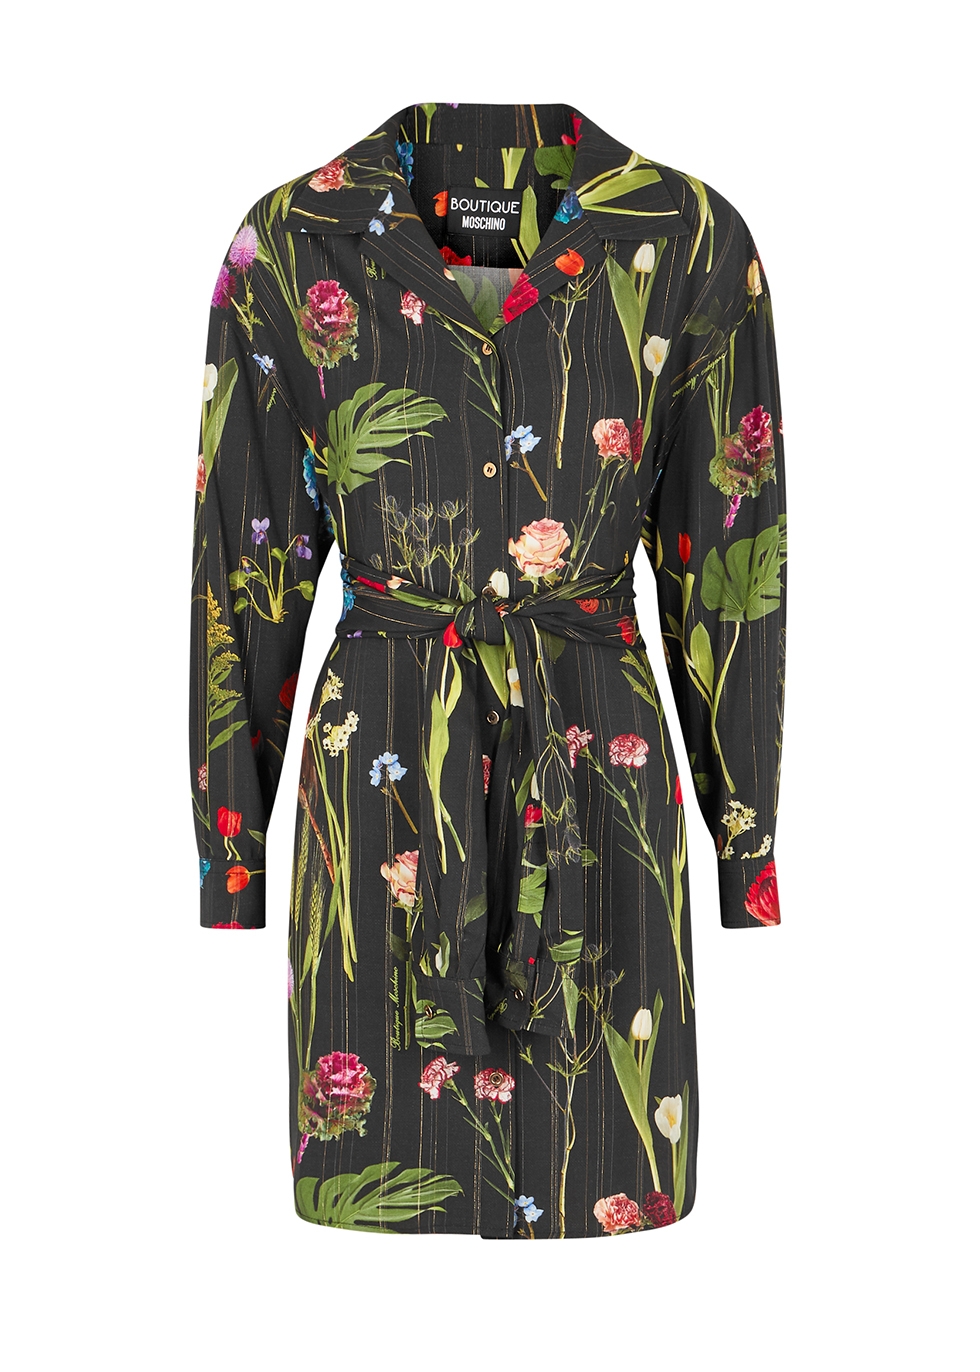 Boutique Moschino Floral-print shirt 